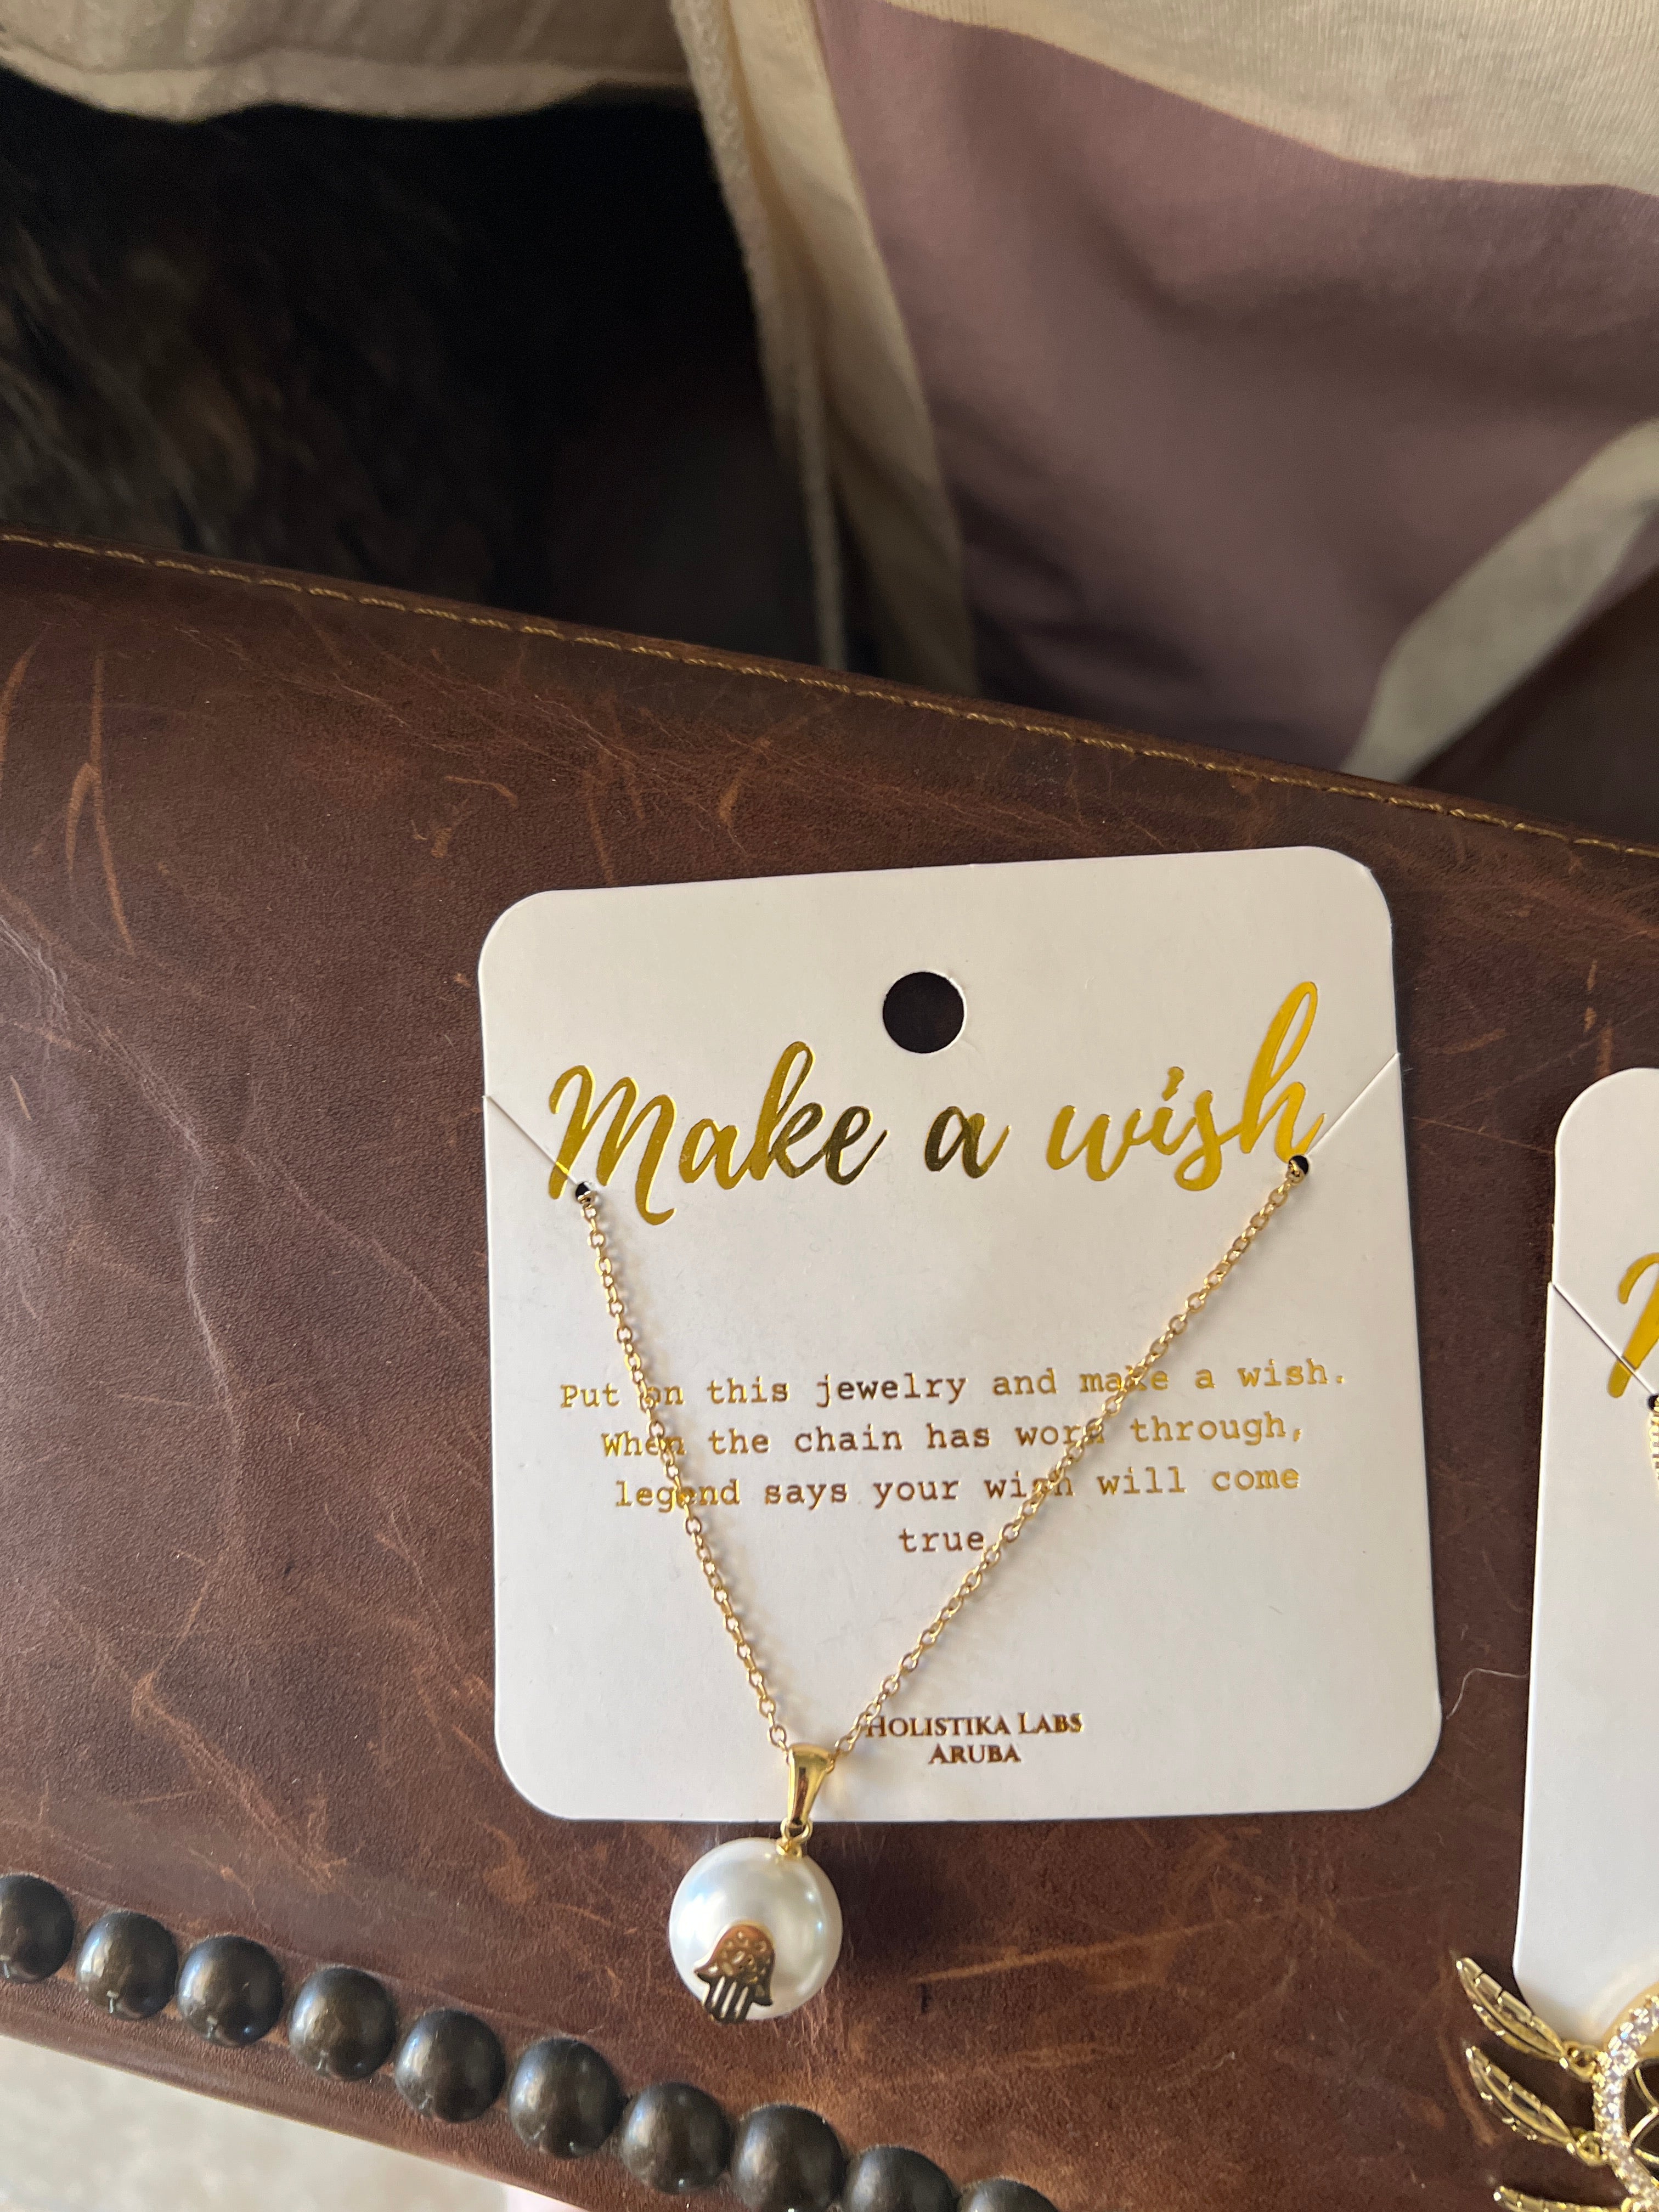 Make a wish necklace card